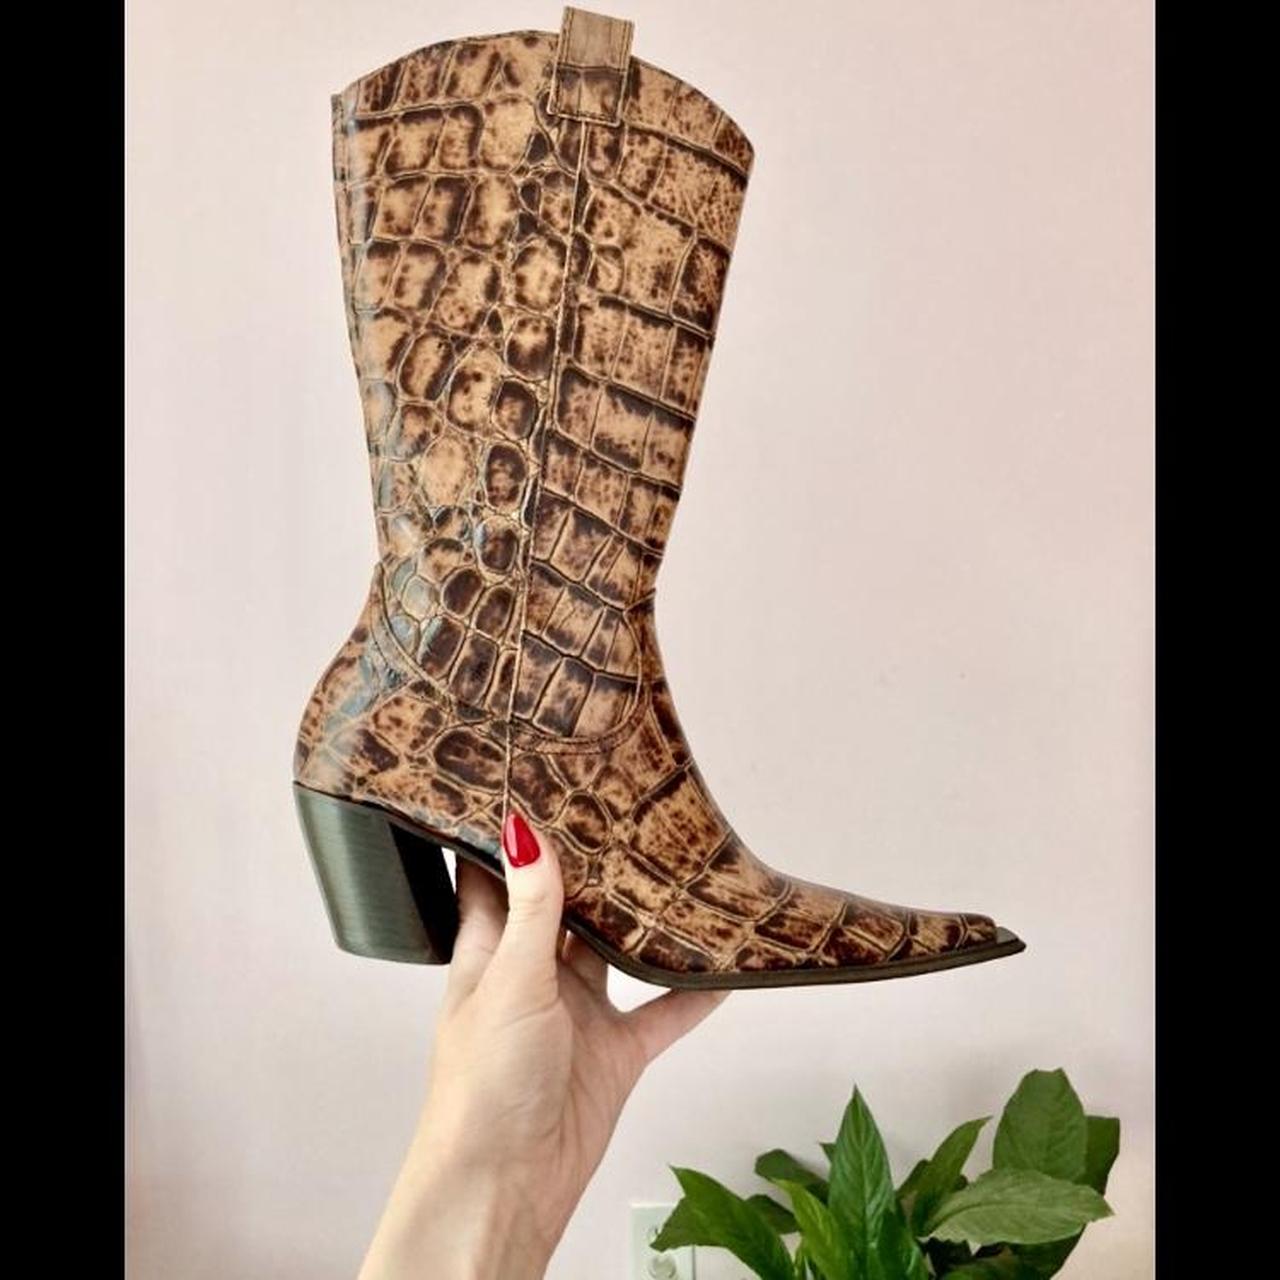 Product Image 1 - Dream boots 🥲🤠
Extremely pointy leather